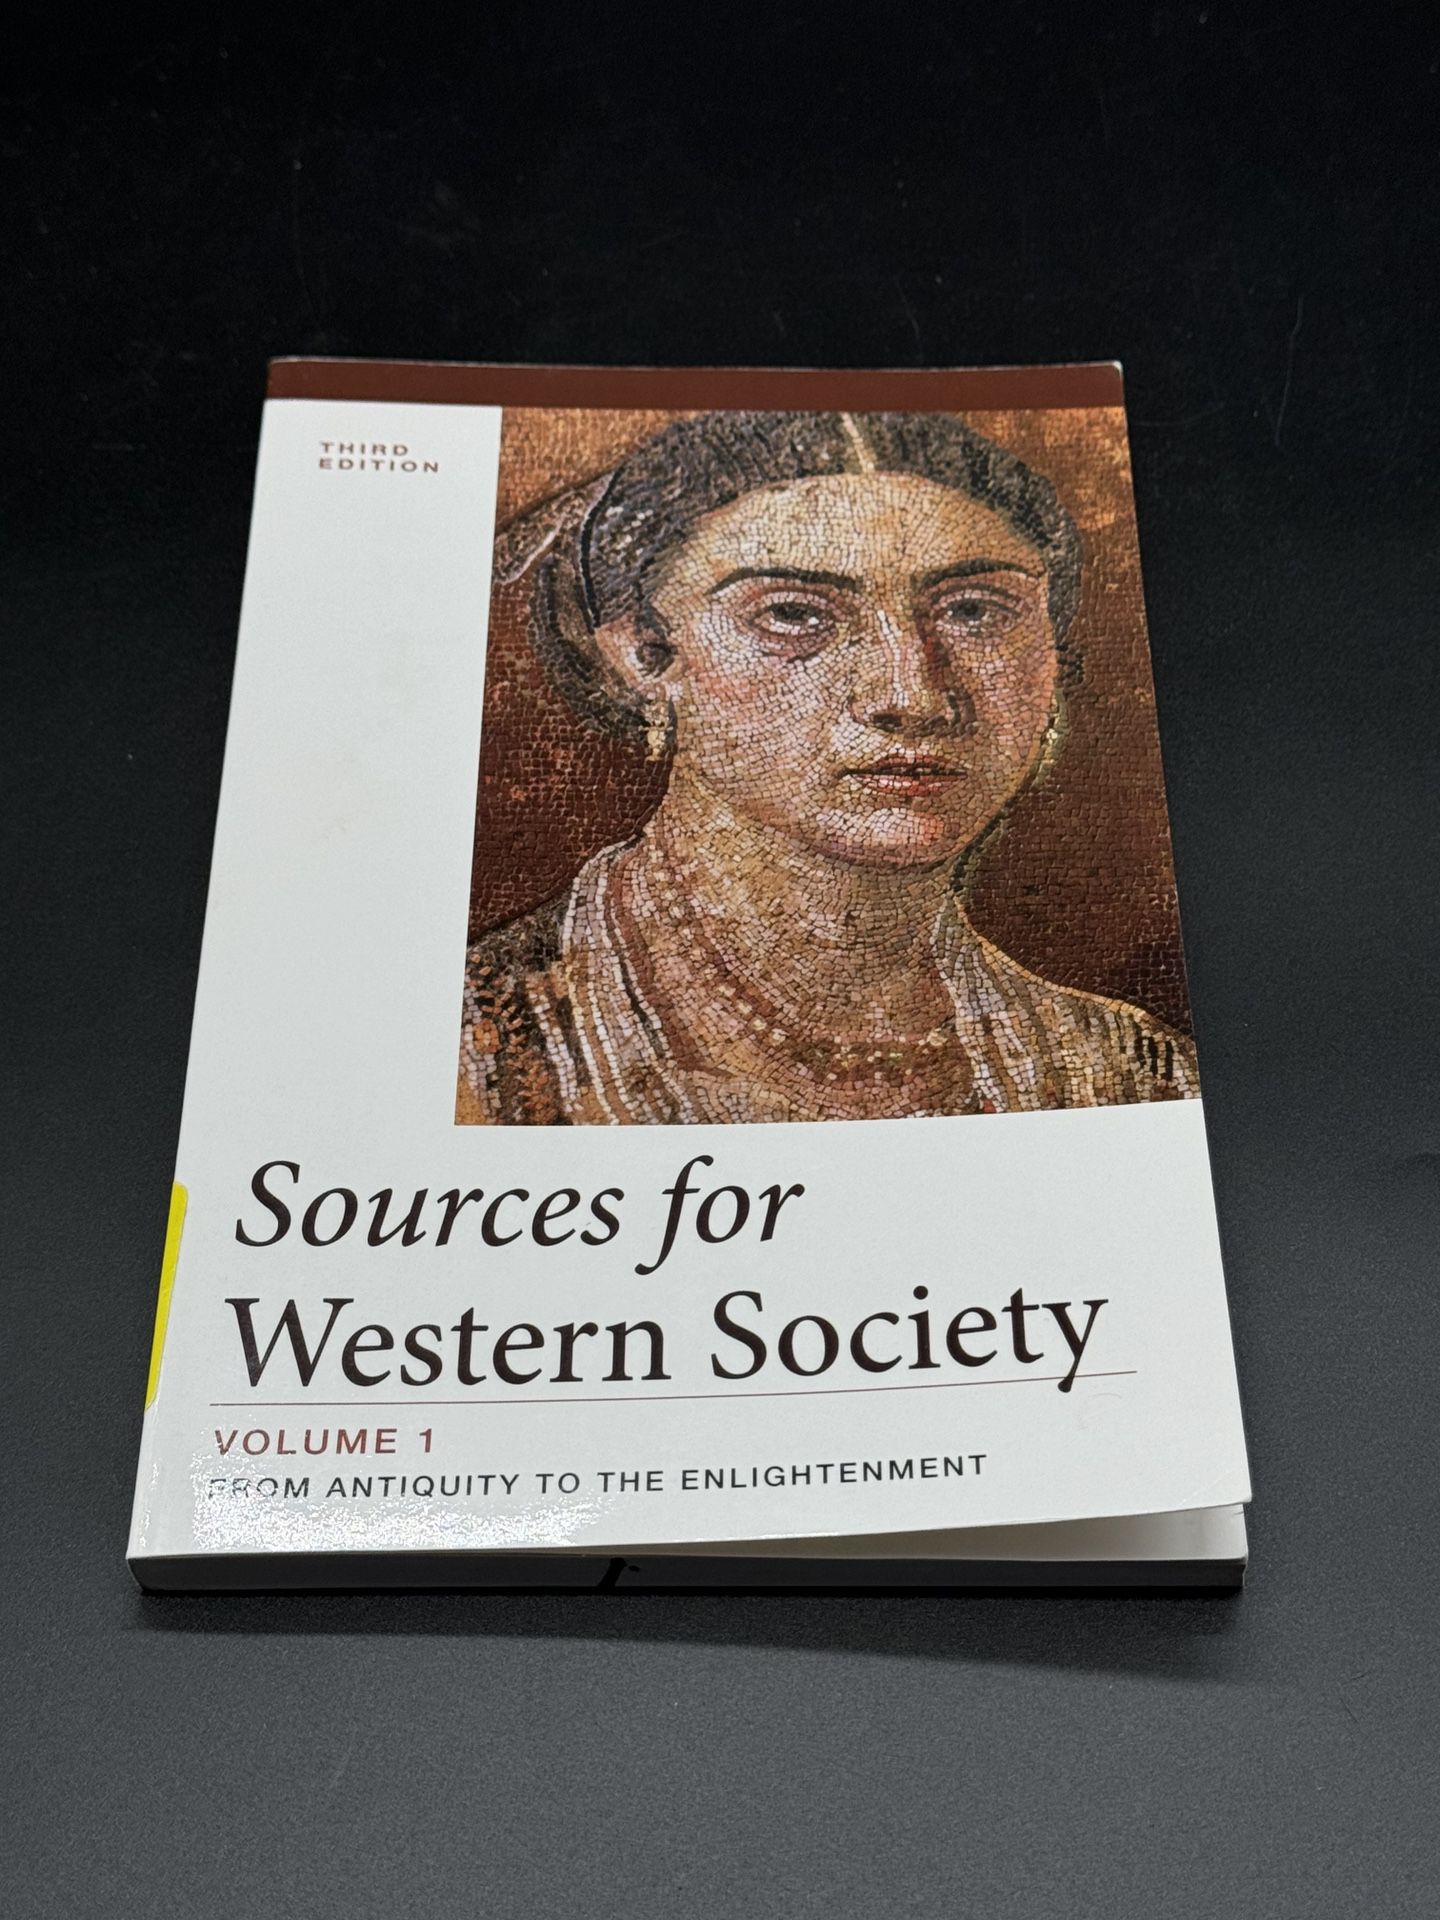 Sources For Western Society 3rd edition Volume 1 Book 